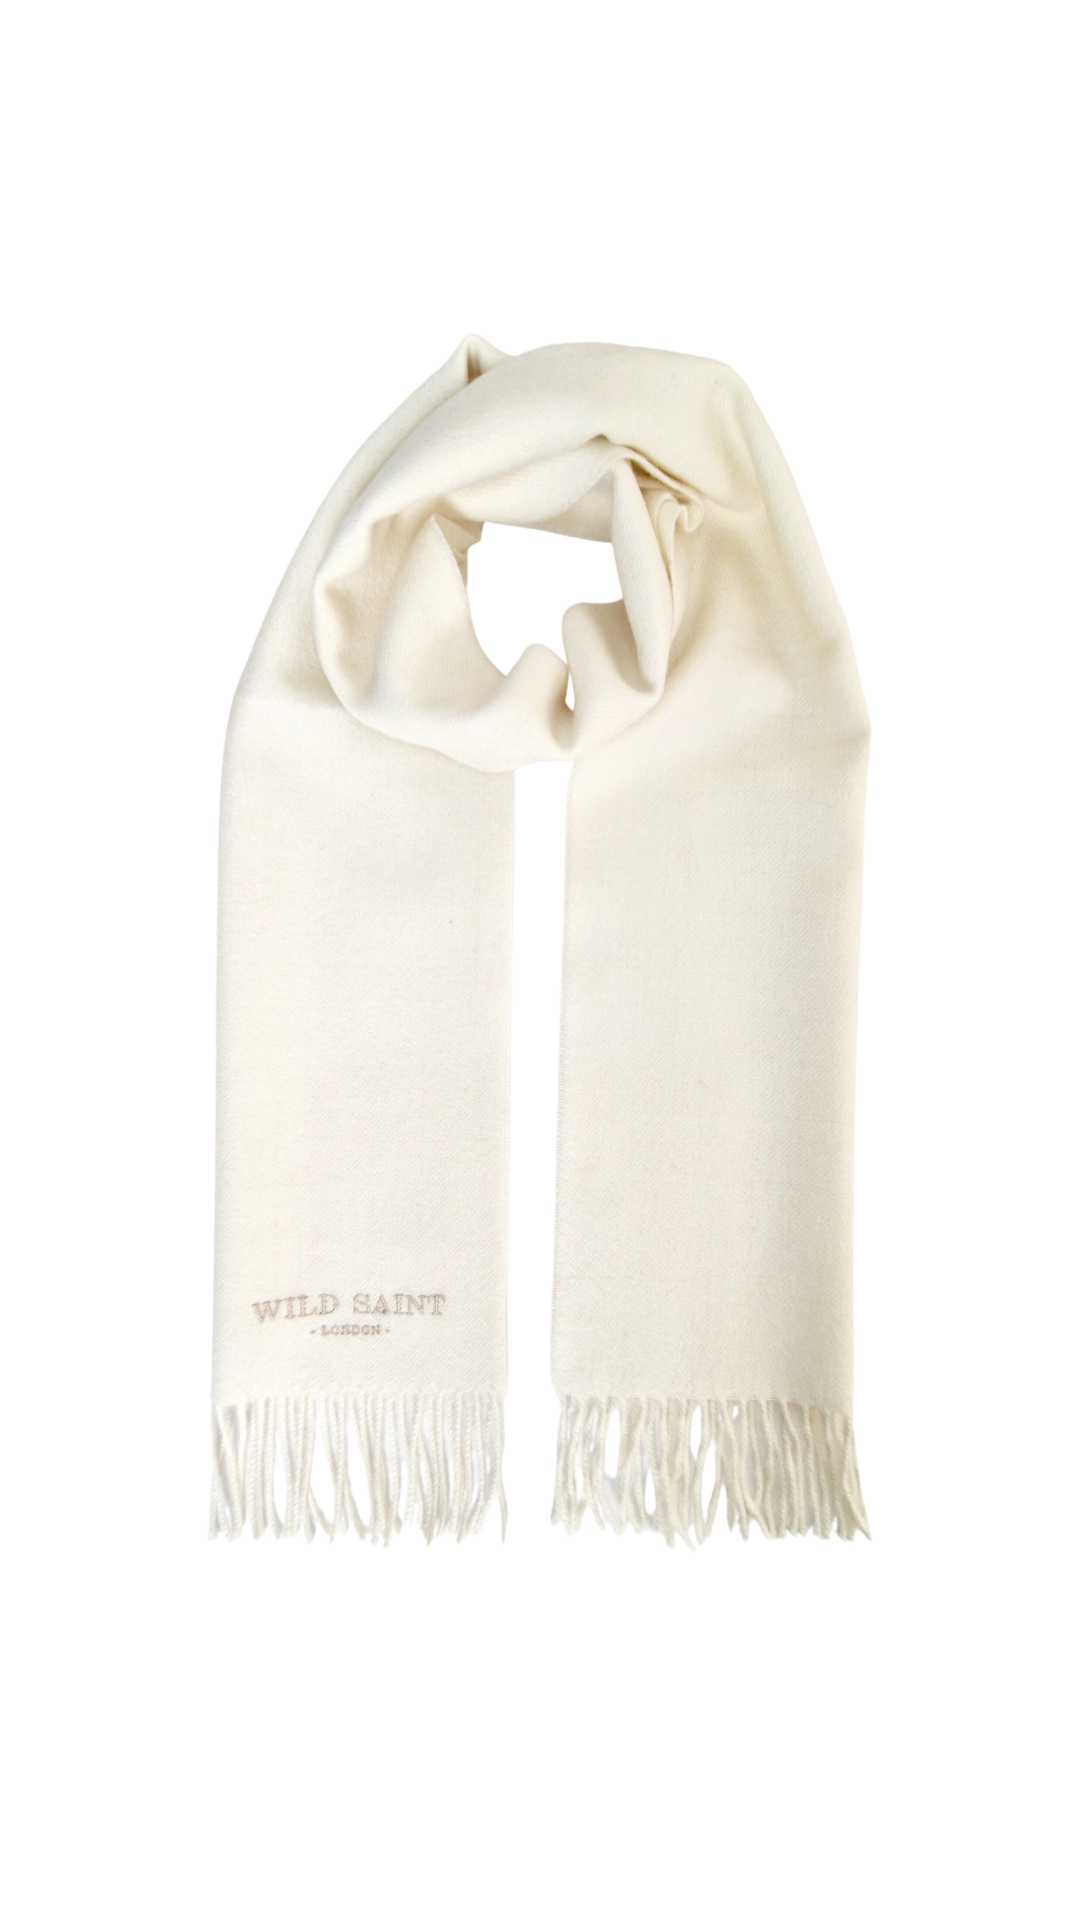 Cloud White medium weight 100% baby alpaca scarf for women and men. Includes complimentary personlisation. Sustainable Luxury designer scarf